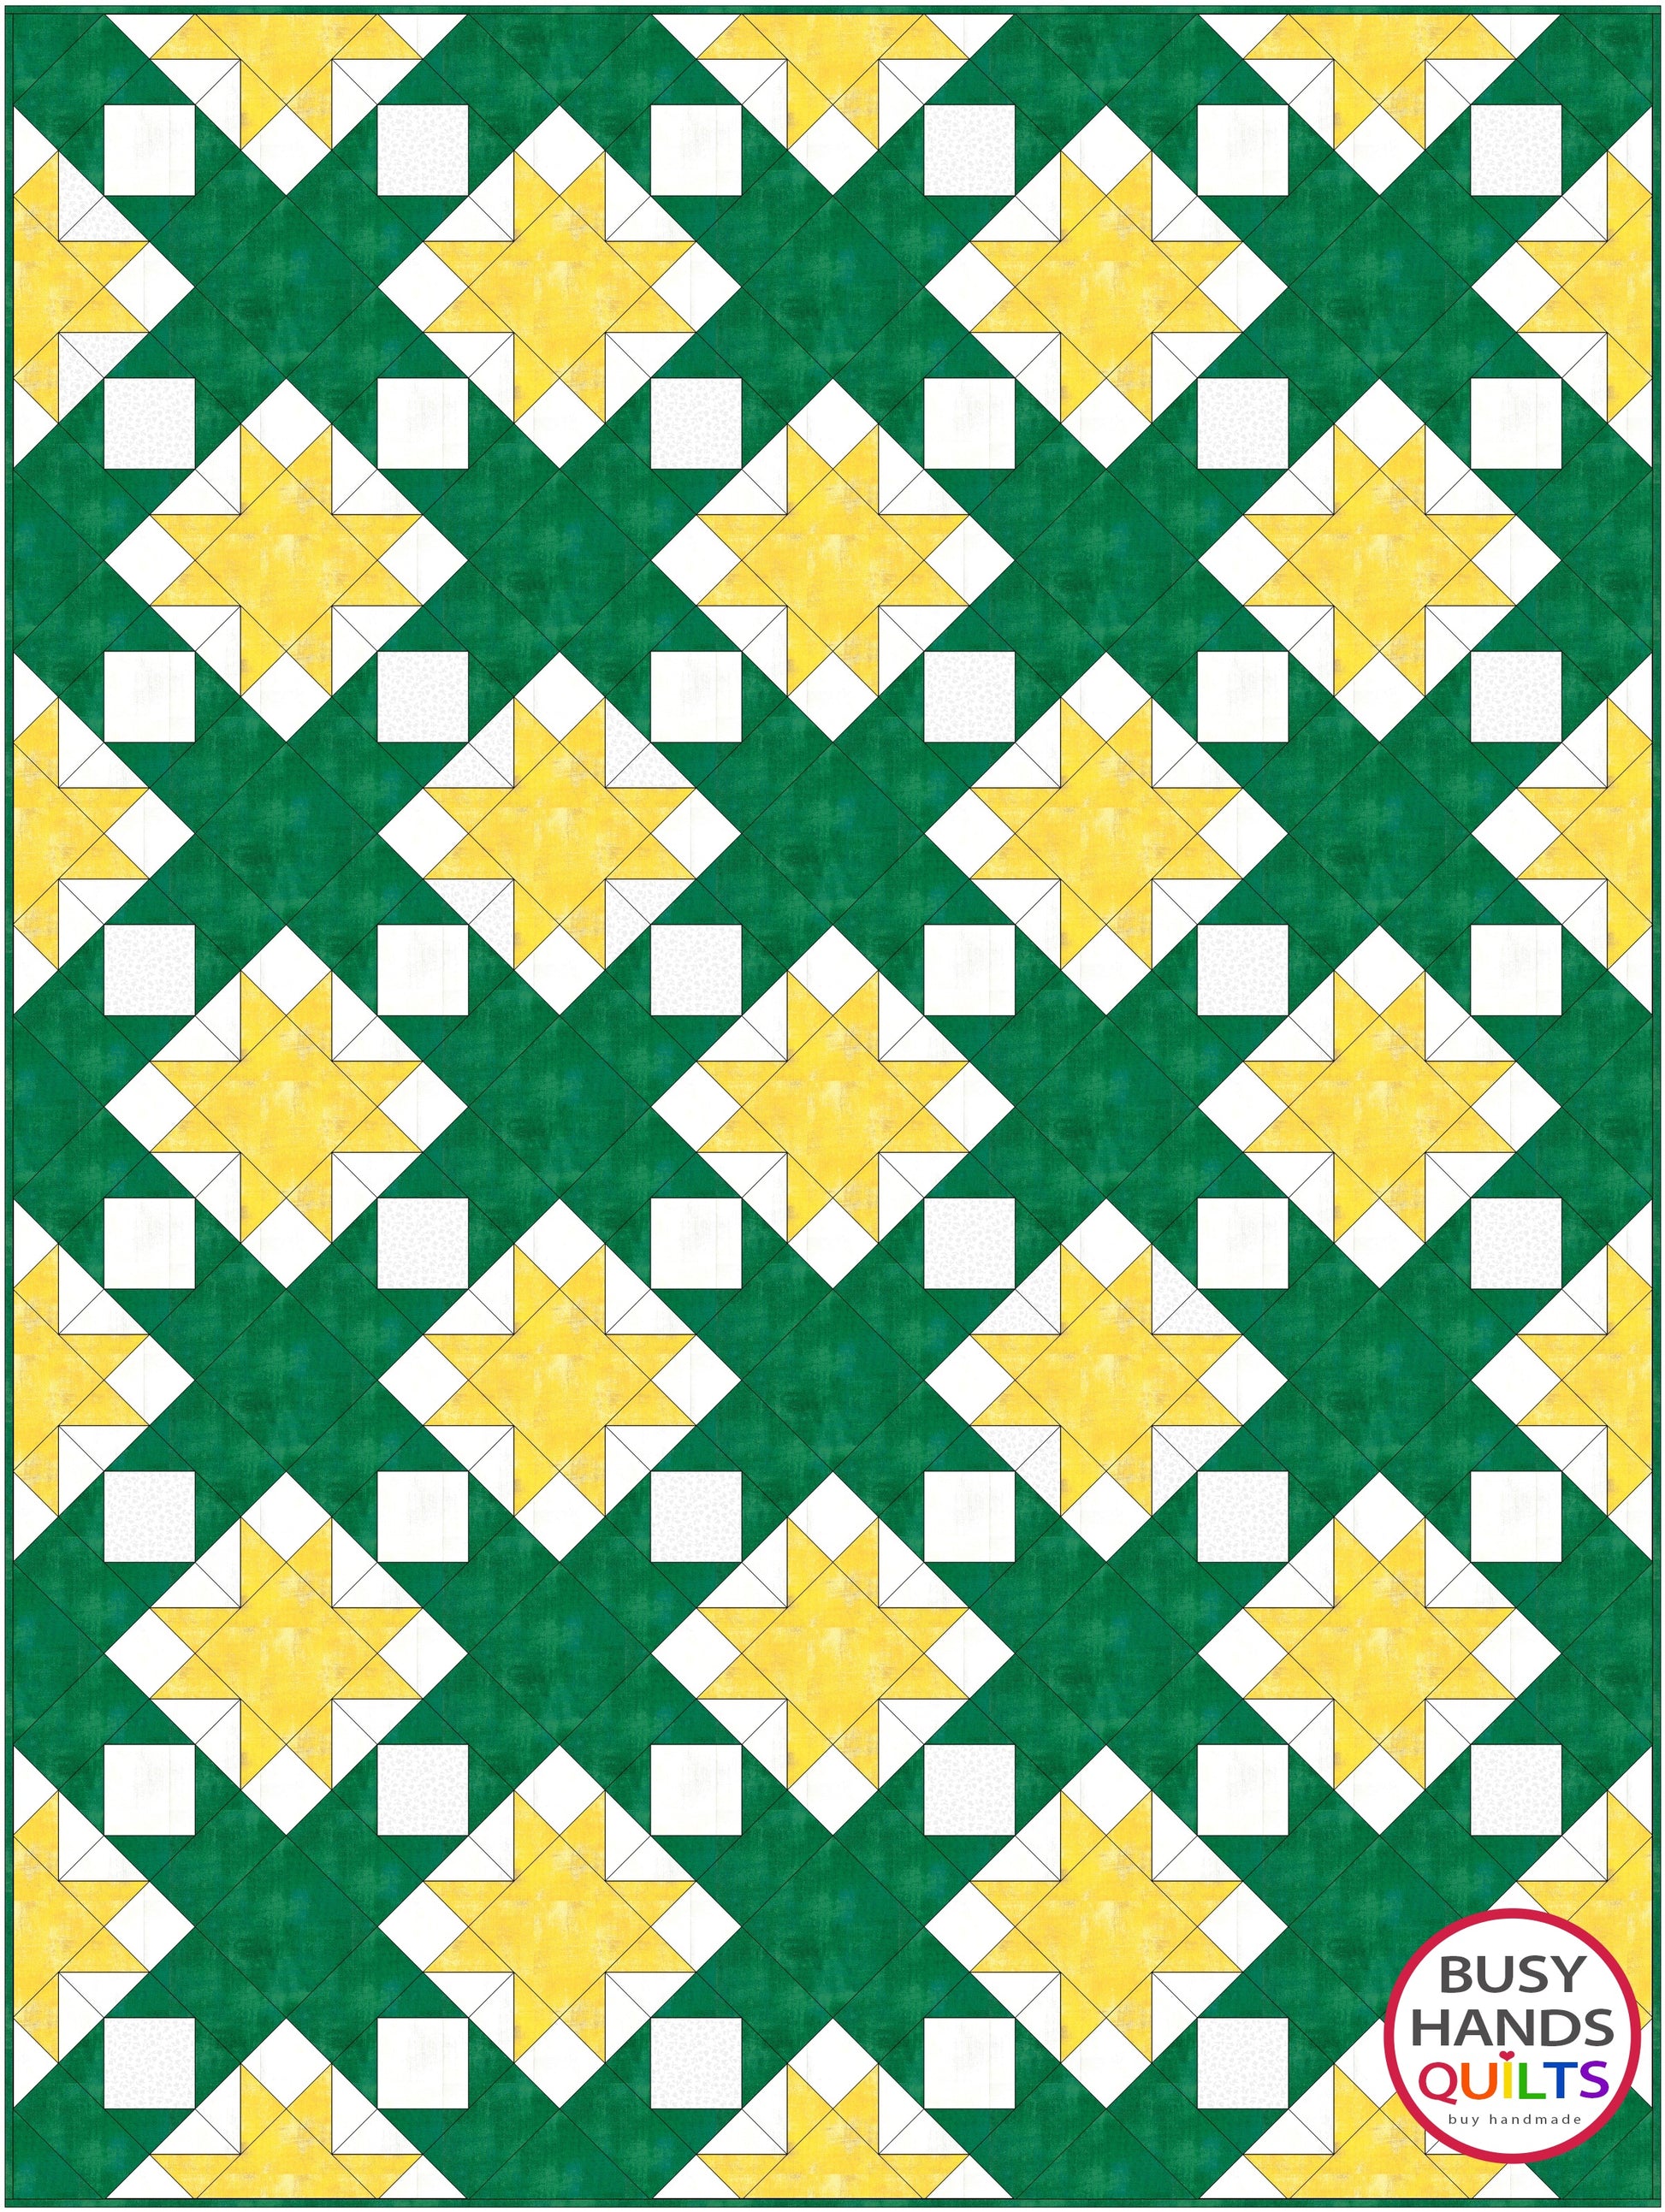 School Colors Quilt Pattern PRINTED Busy Hands Quilts {$price}